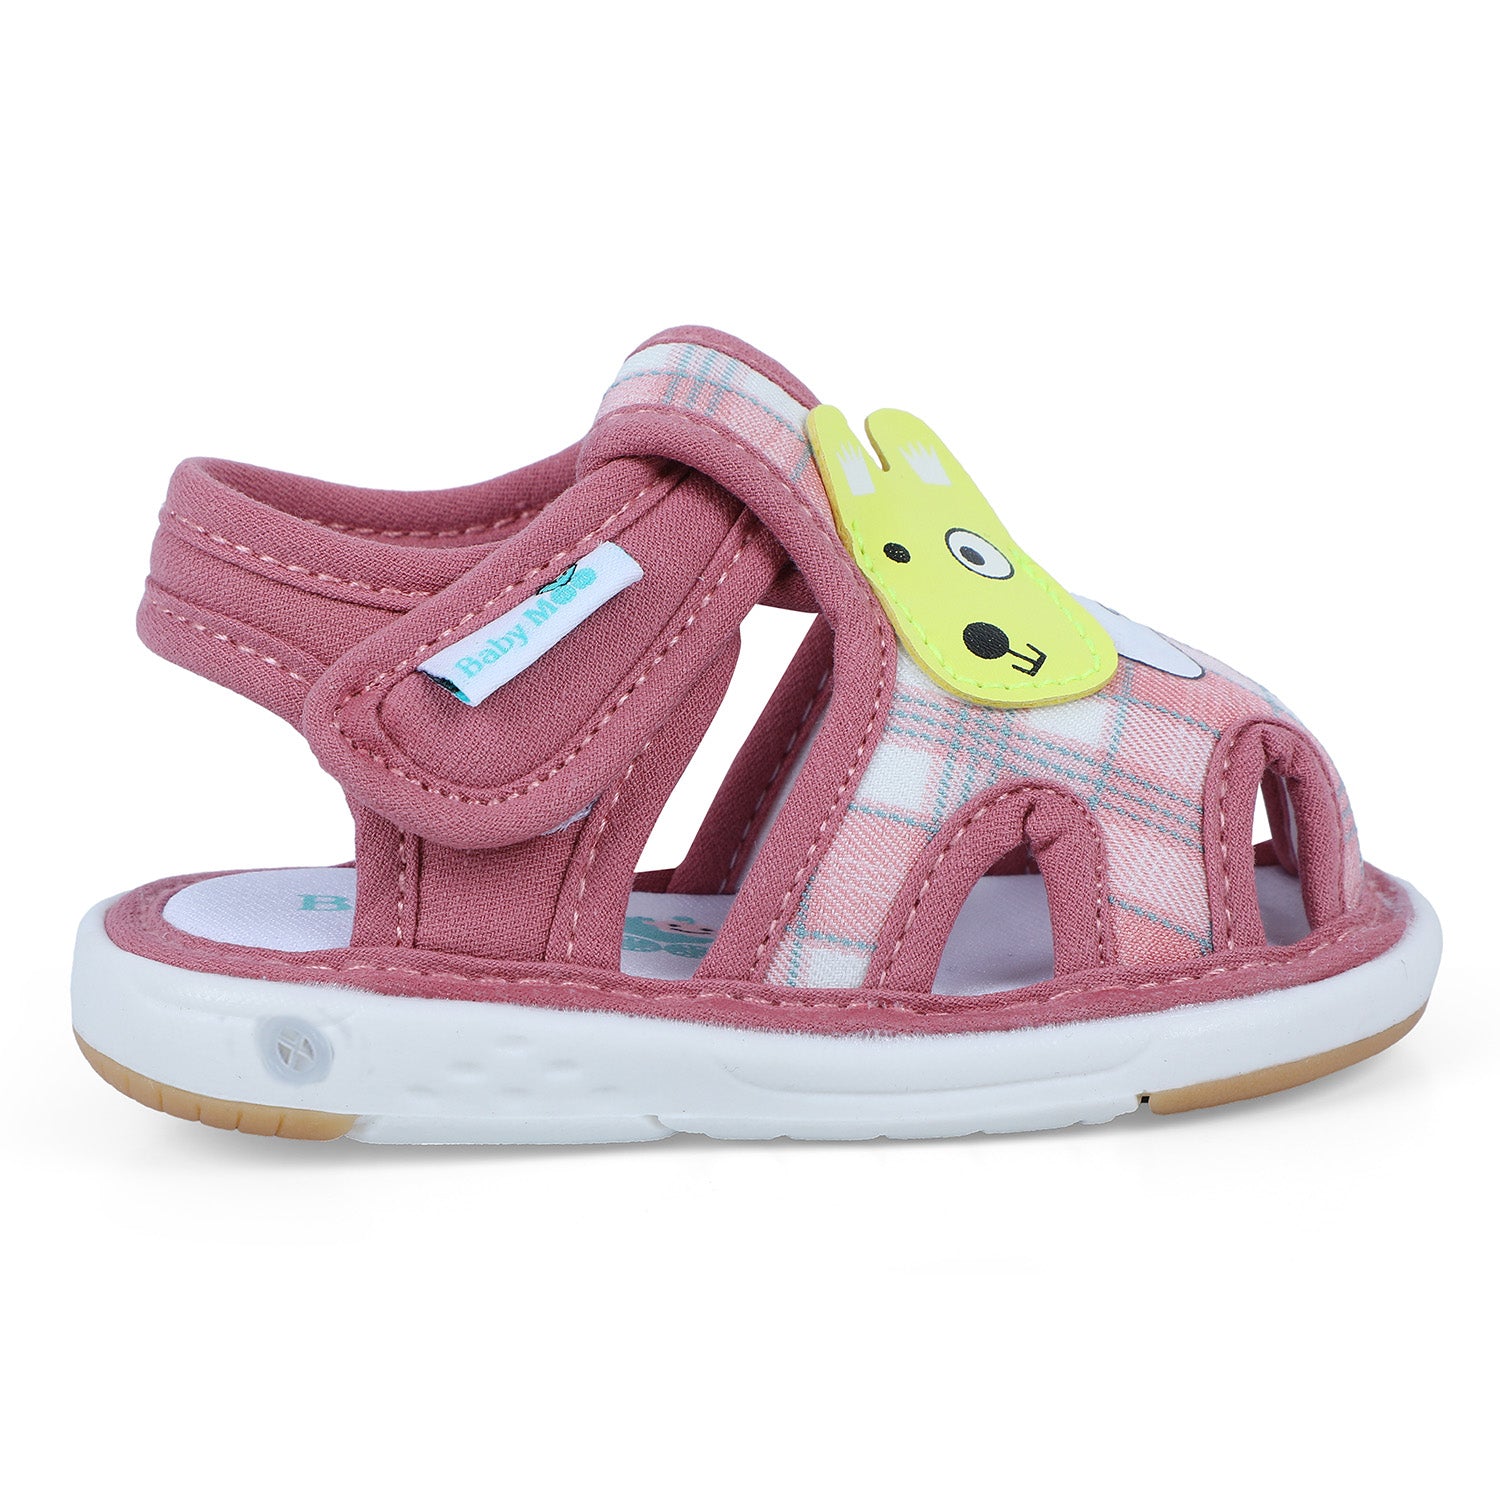 Baby Moo Cute Puppy Checked Chu-Chu Sound Breathable Anti-Skid Sandals - Pink - Baby Moo